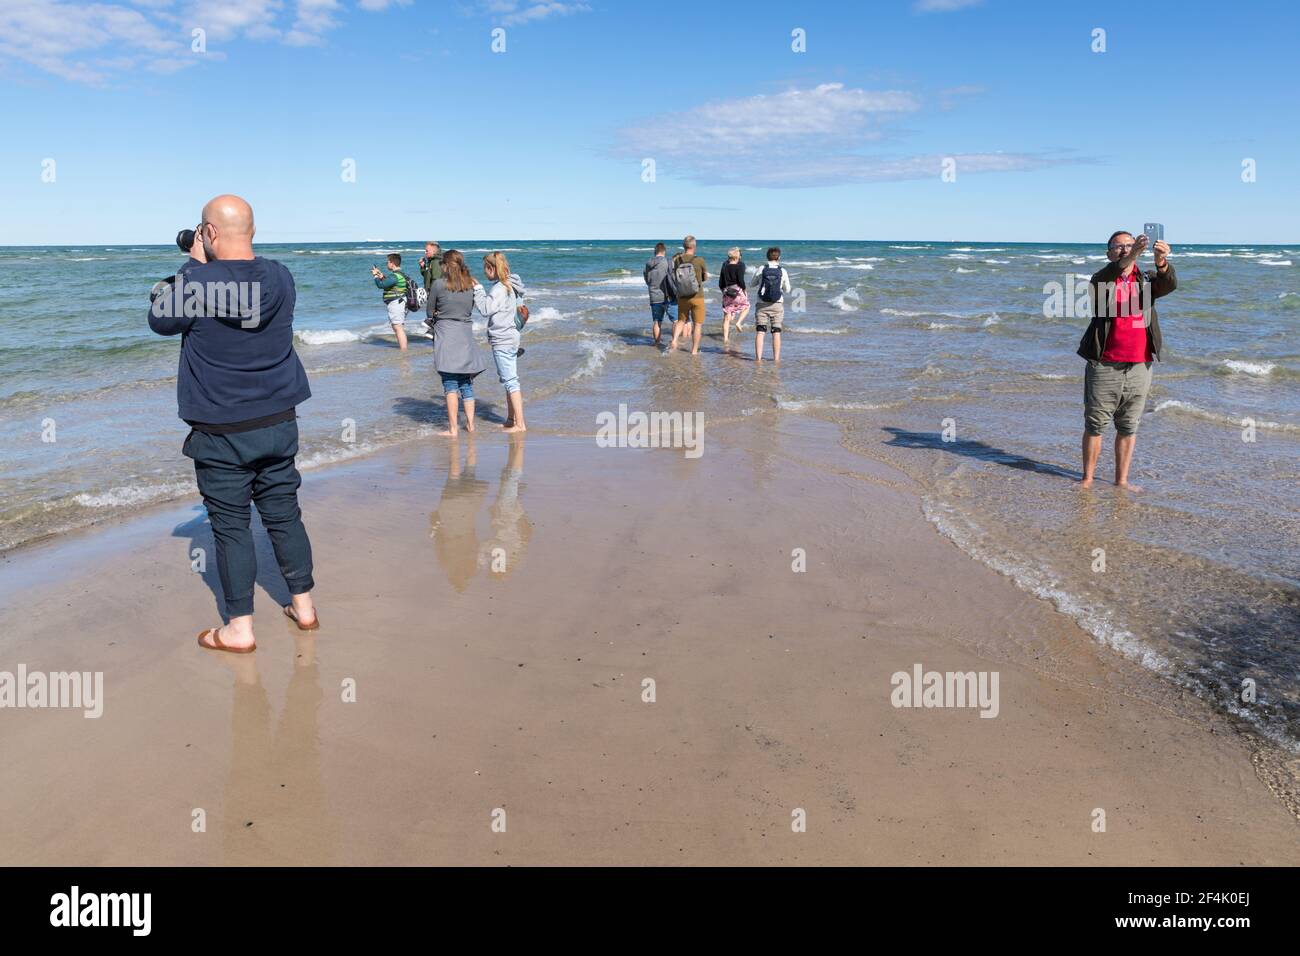 Skagen, Denmark - August 31, 2020: At Grenen, the northernmost point of Denmark, where Baltic Sea and North Sea waves meet, tourists are taking photos Stock Photo